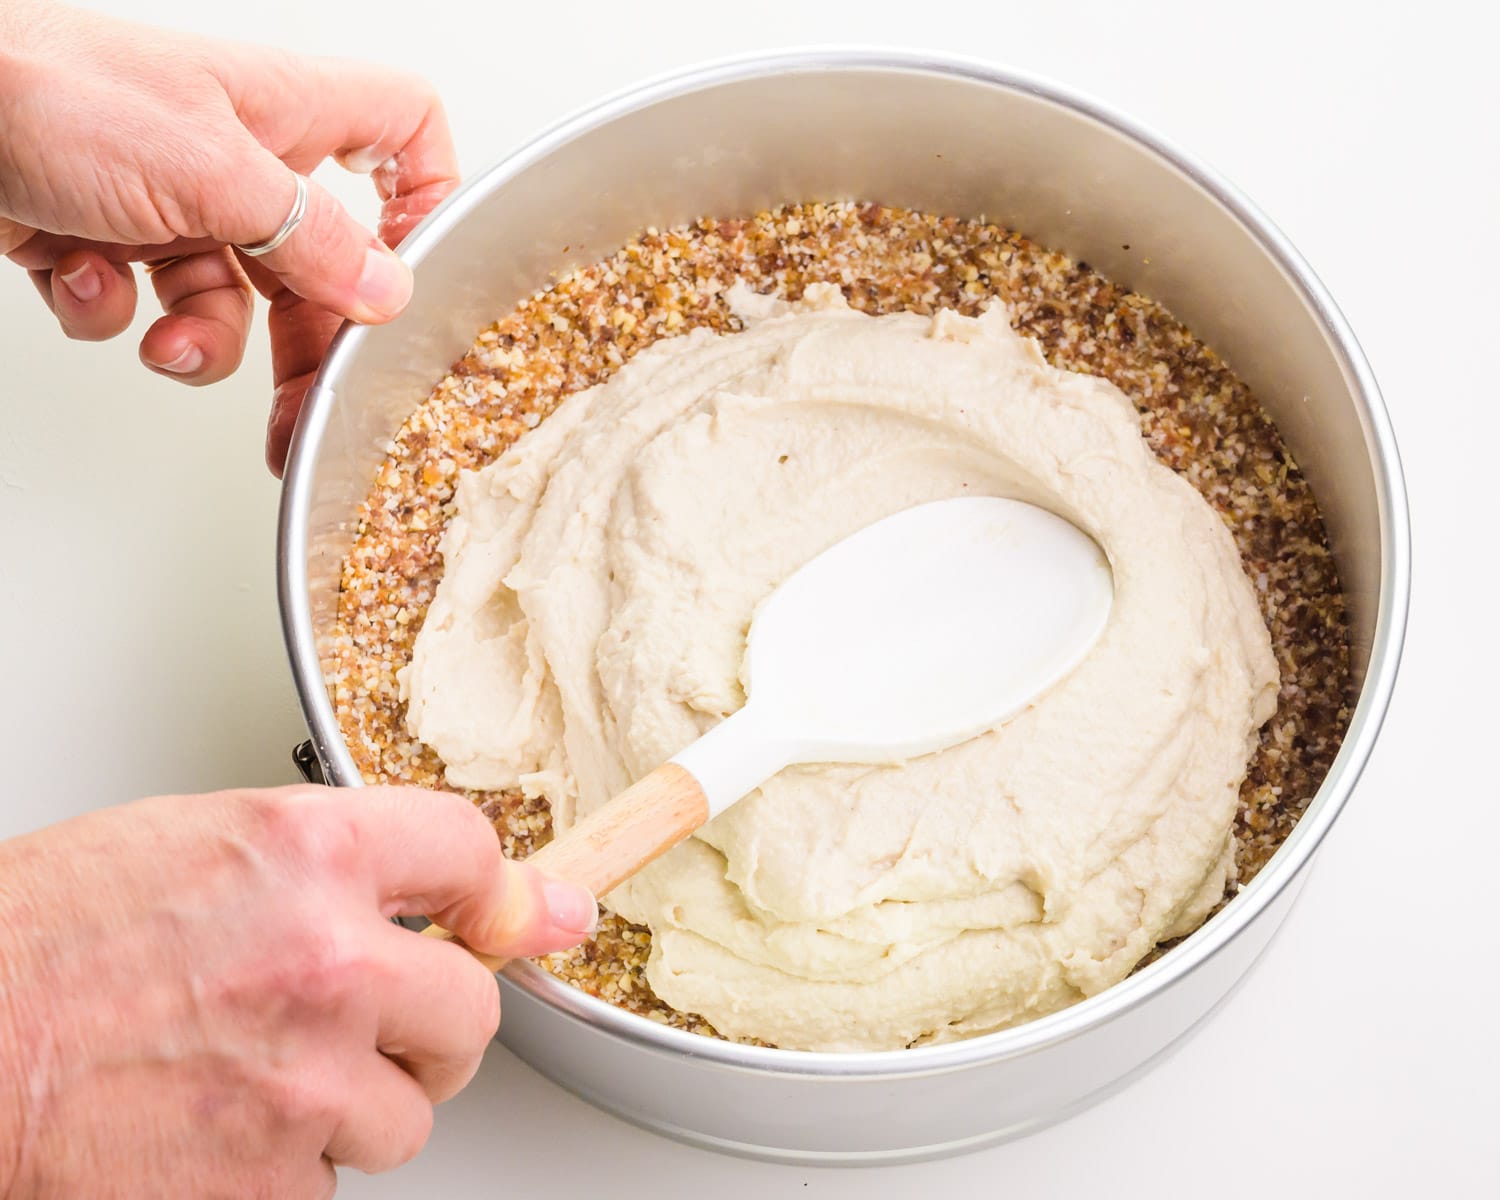 A hand holds a spatula, spreading raw cashew filling evenly across the bottom of a springform pan.